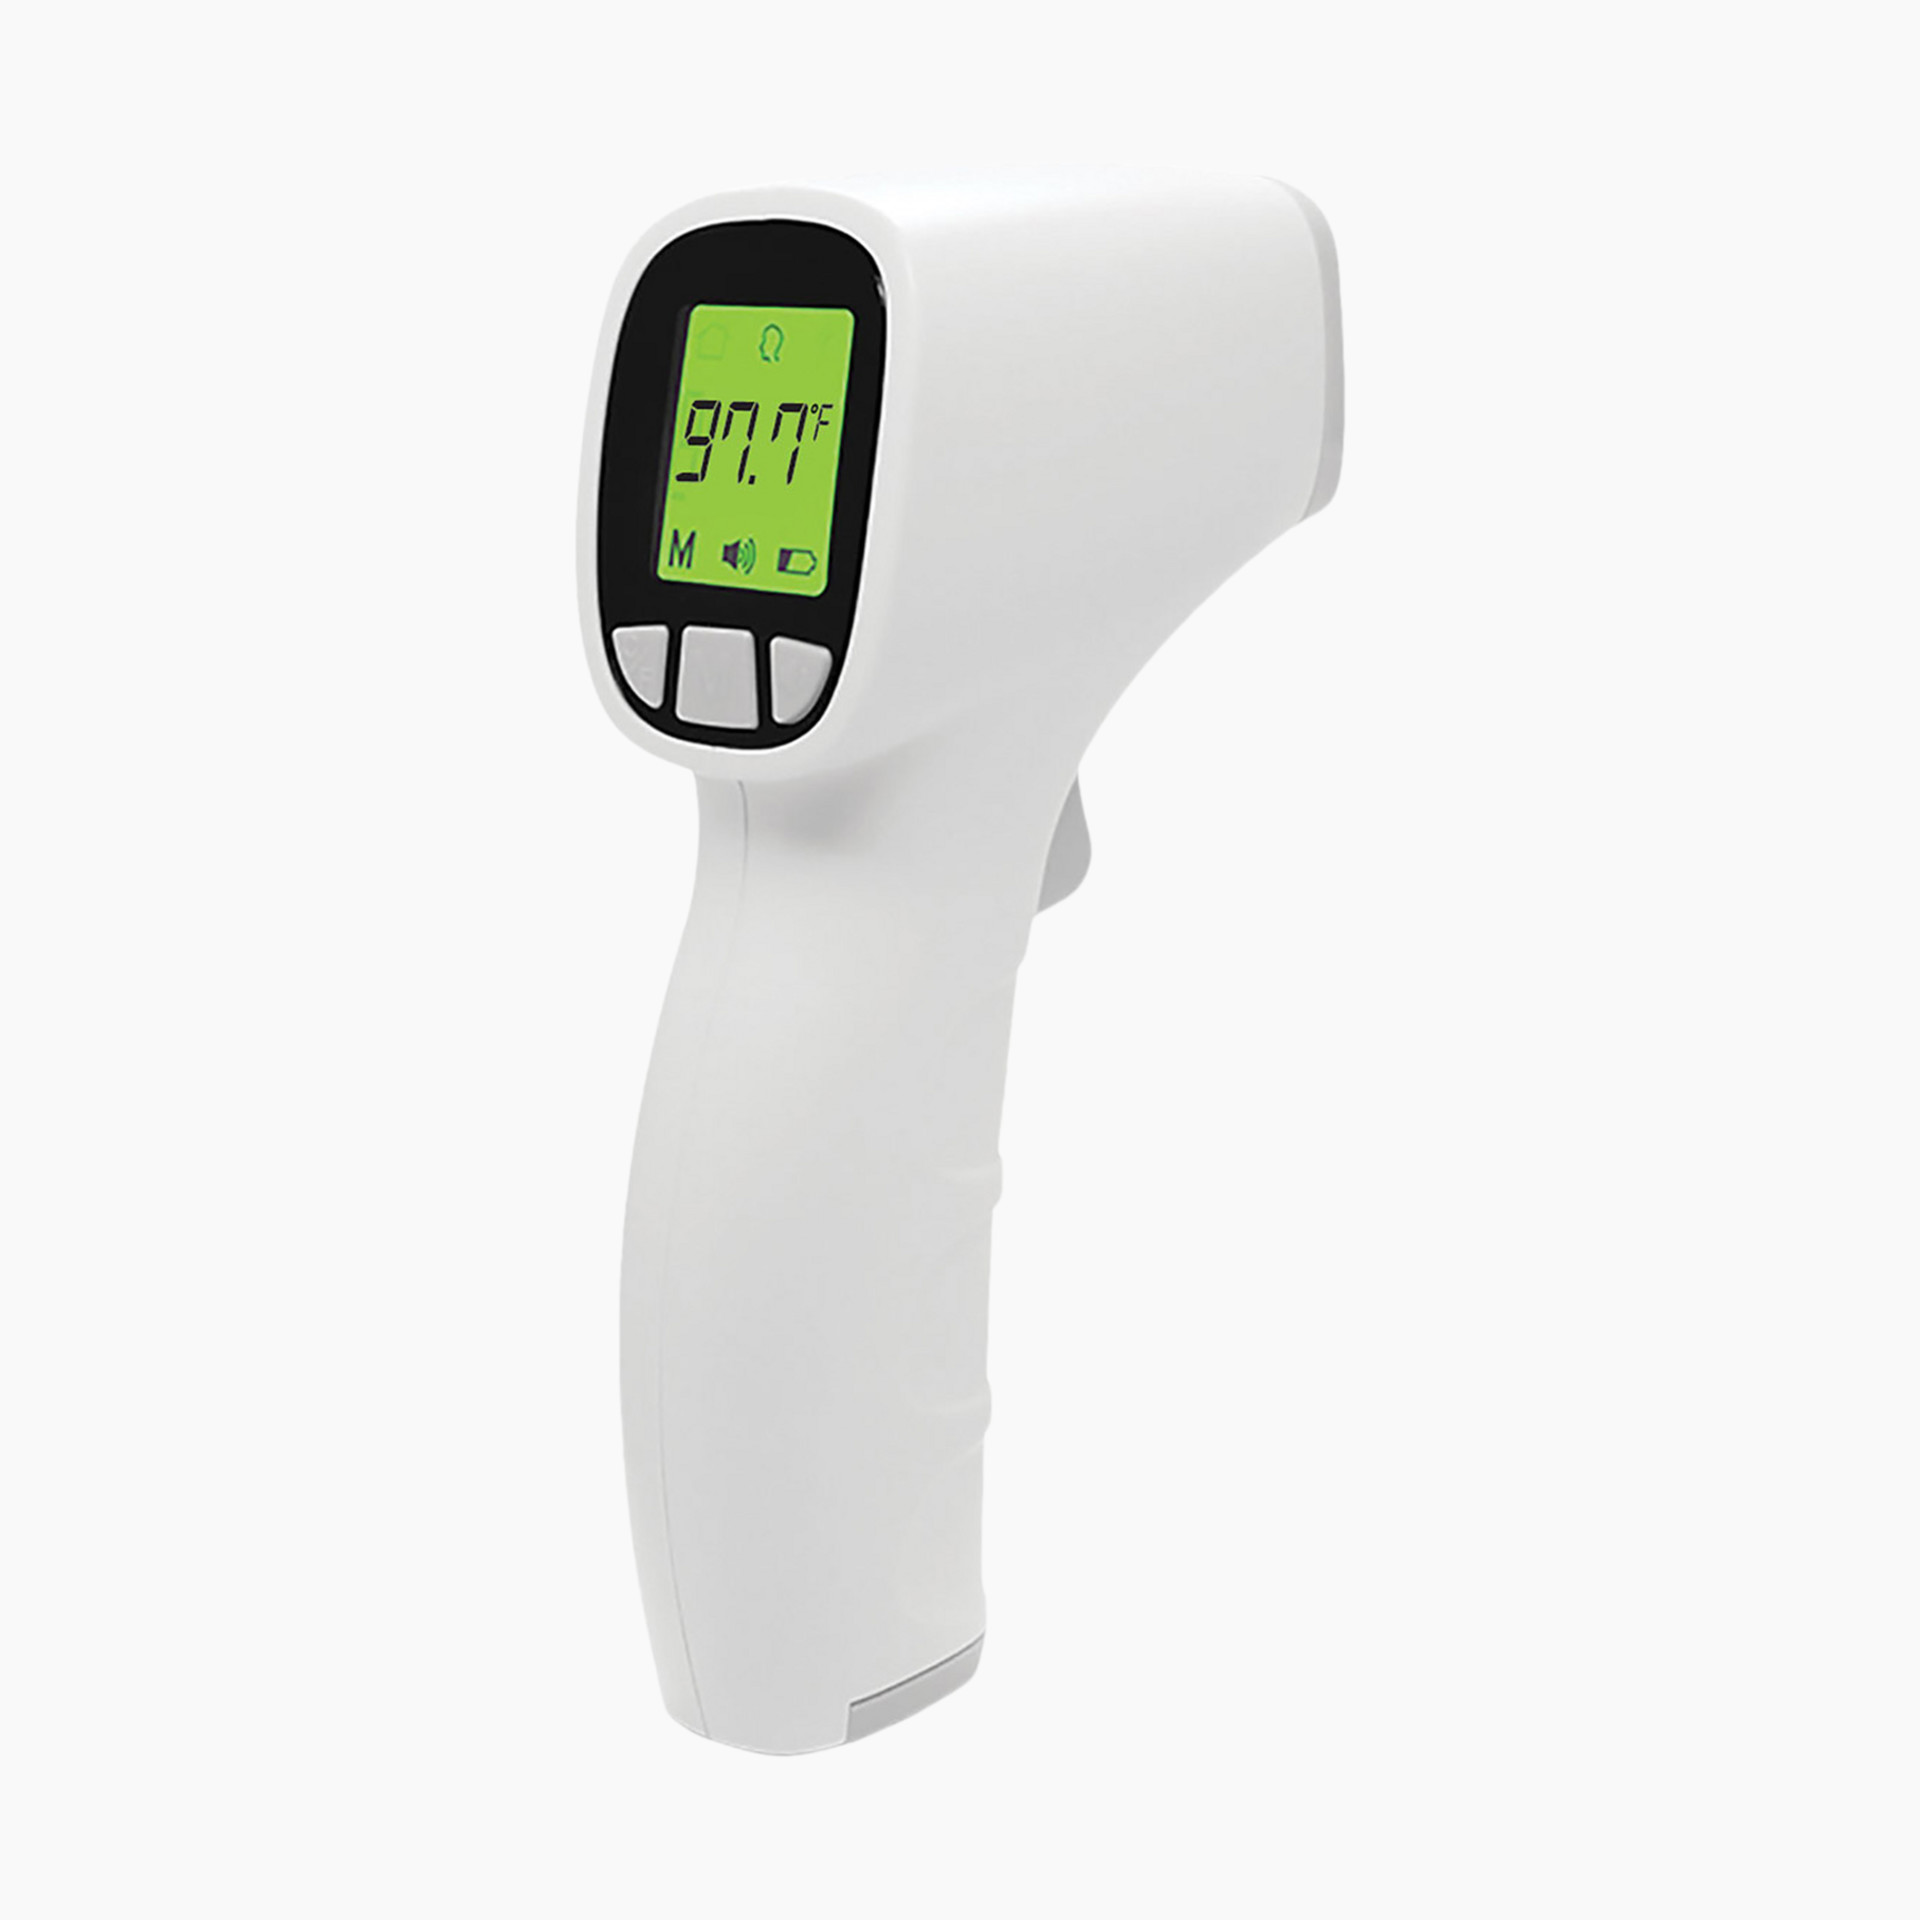 The best infrared thermometers of 2023, according to experts